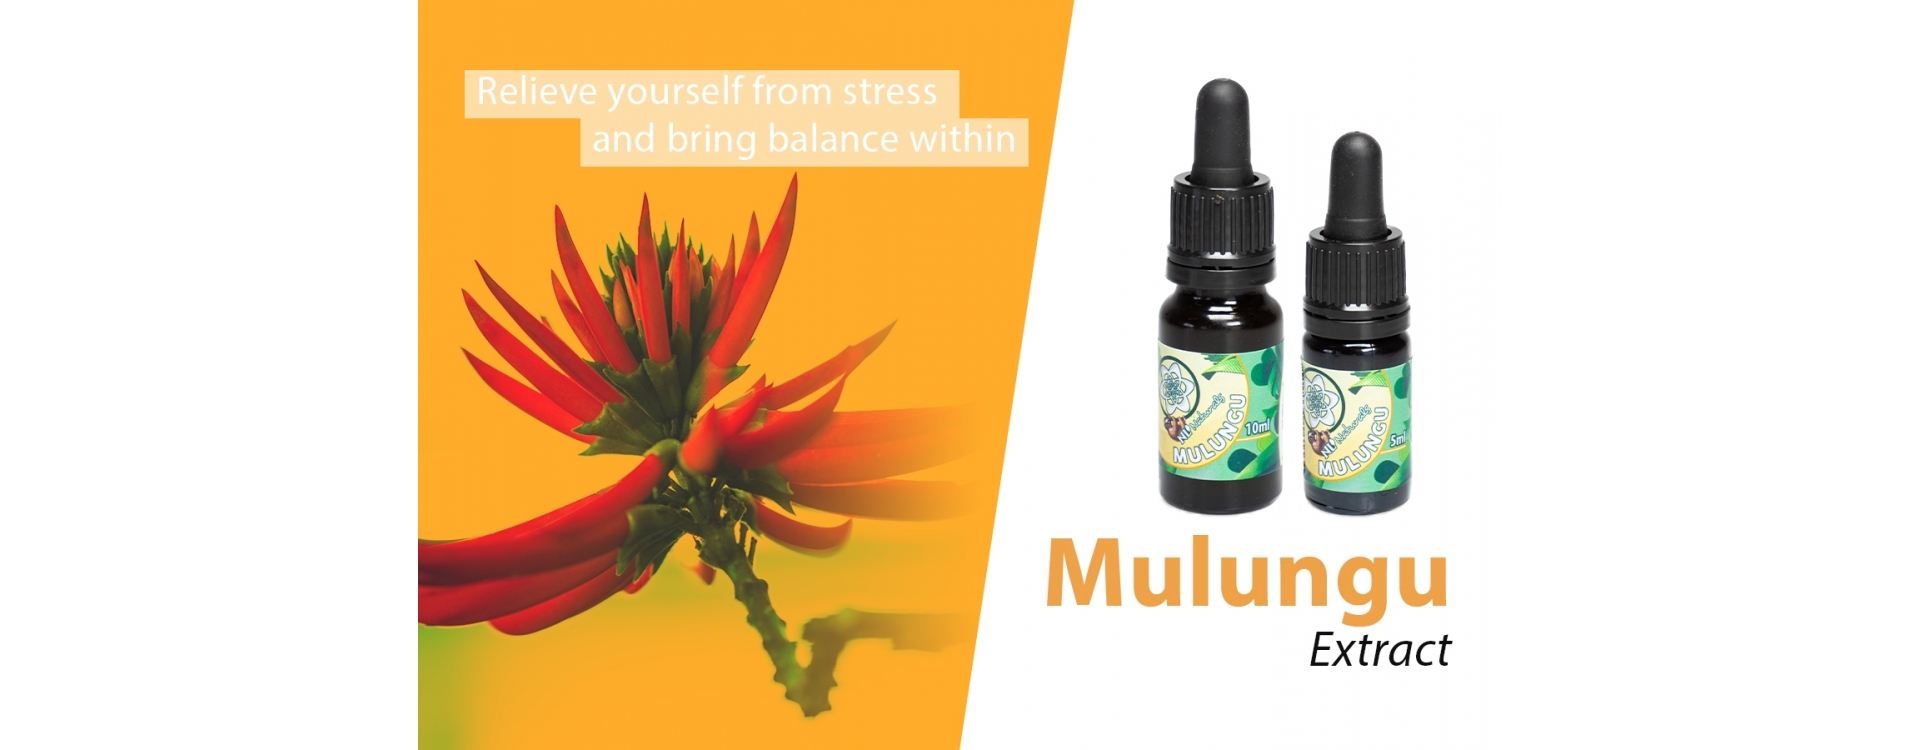 Mulungu Extract, a Brazilian source of relaxation and peace!